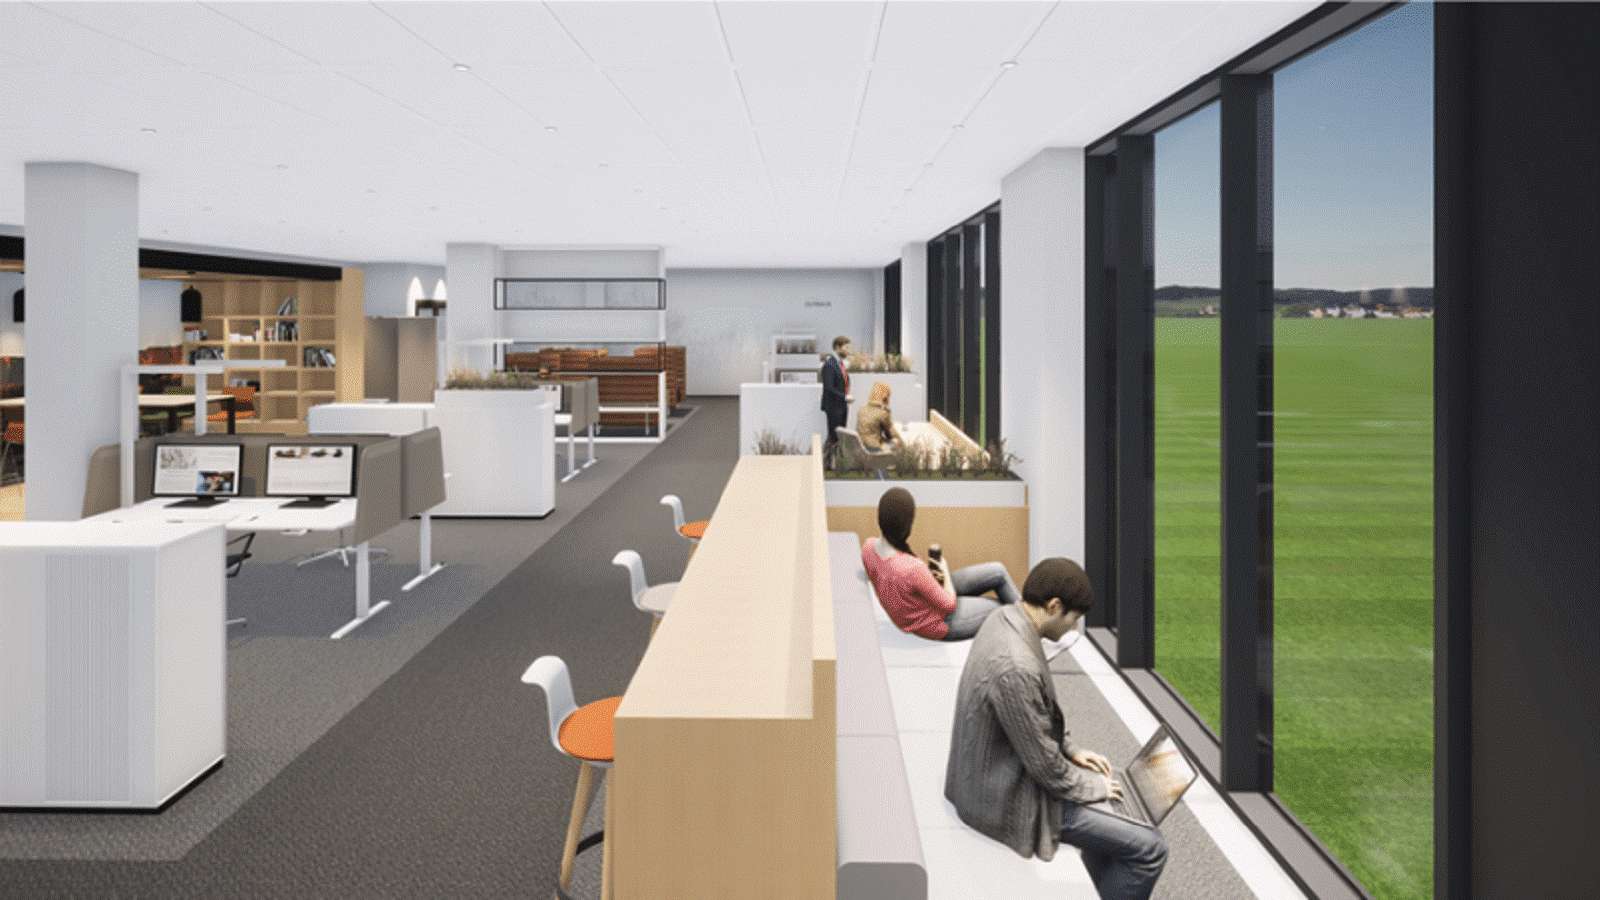 A rendering of CSL's new R&D building in Marburg, Germany, that uses large windows to blend indoor and outdoor space.